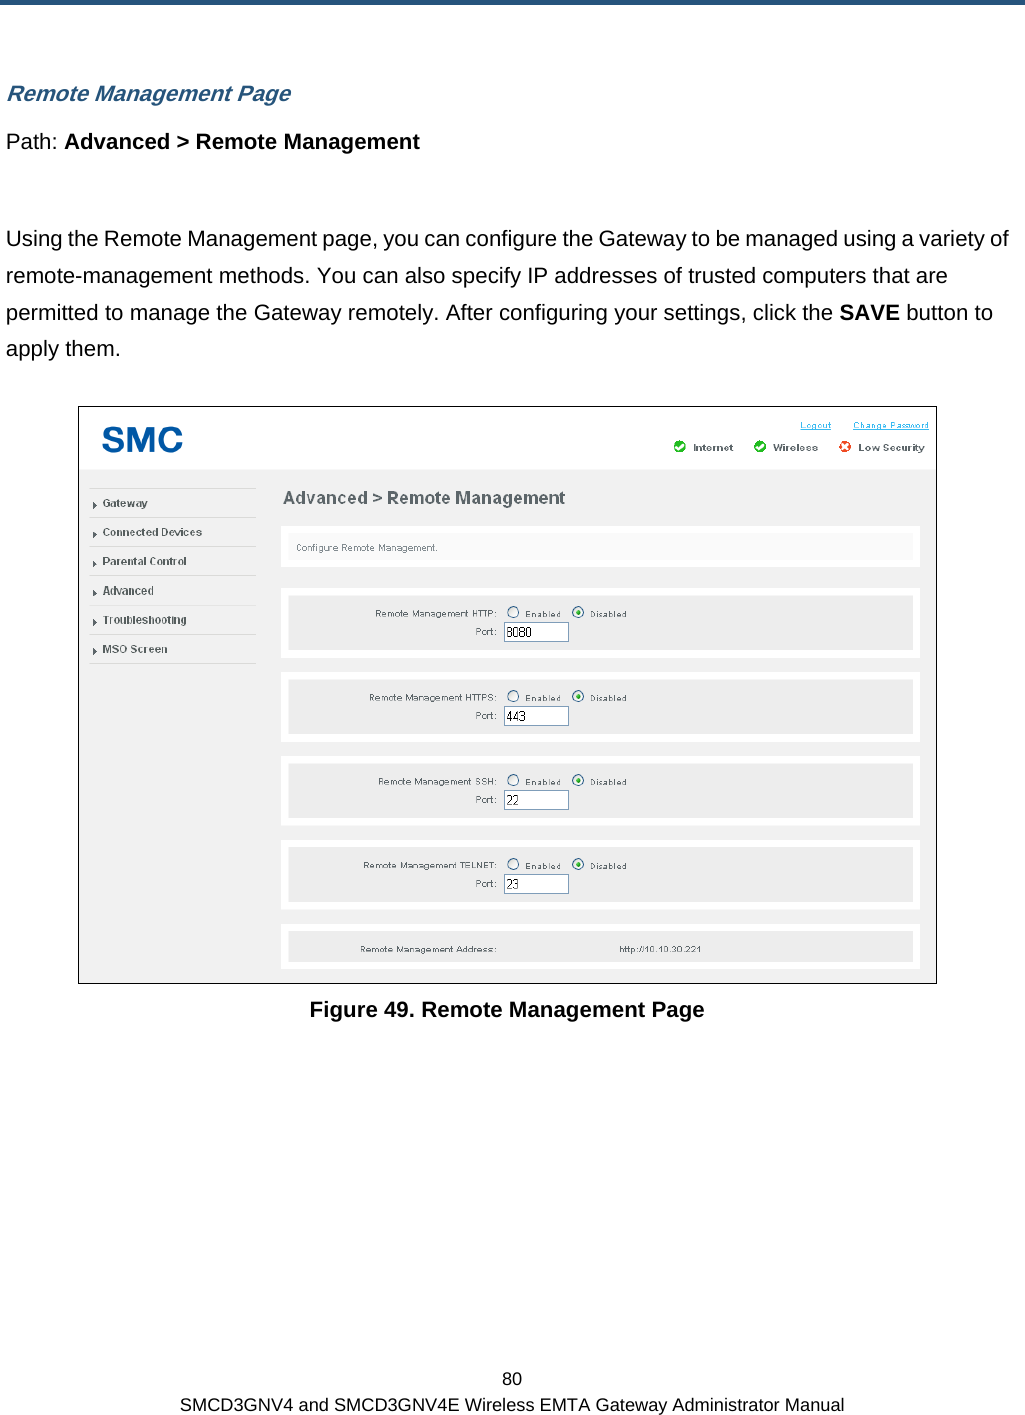  80 SMCD3GNV4 and SMCD3GNV4E Wireless EMTA Gateway Administrator Manual Remote Management Page Path: Advanced &gt; Remote Management  Using the Remote Management page, you can configure the Gateway to be managed using a variety of remote-management methods. You can also specify IP addresses of trusted computers that are permitted to manage the Gateway remotely. After configuring your settings, click the SAVE button to apply them.  Figure 49. Remote Management Page 